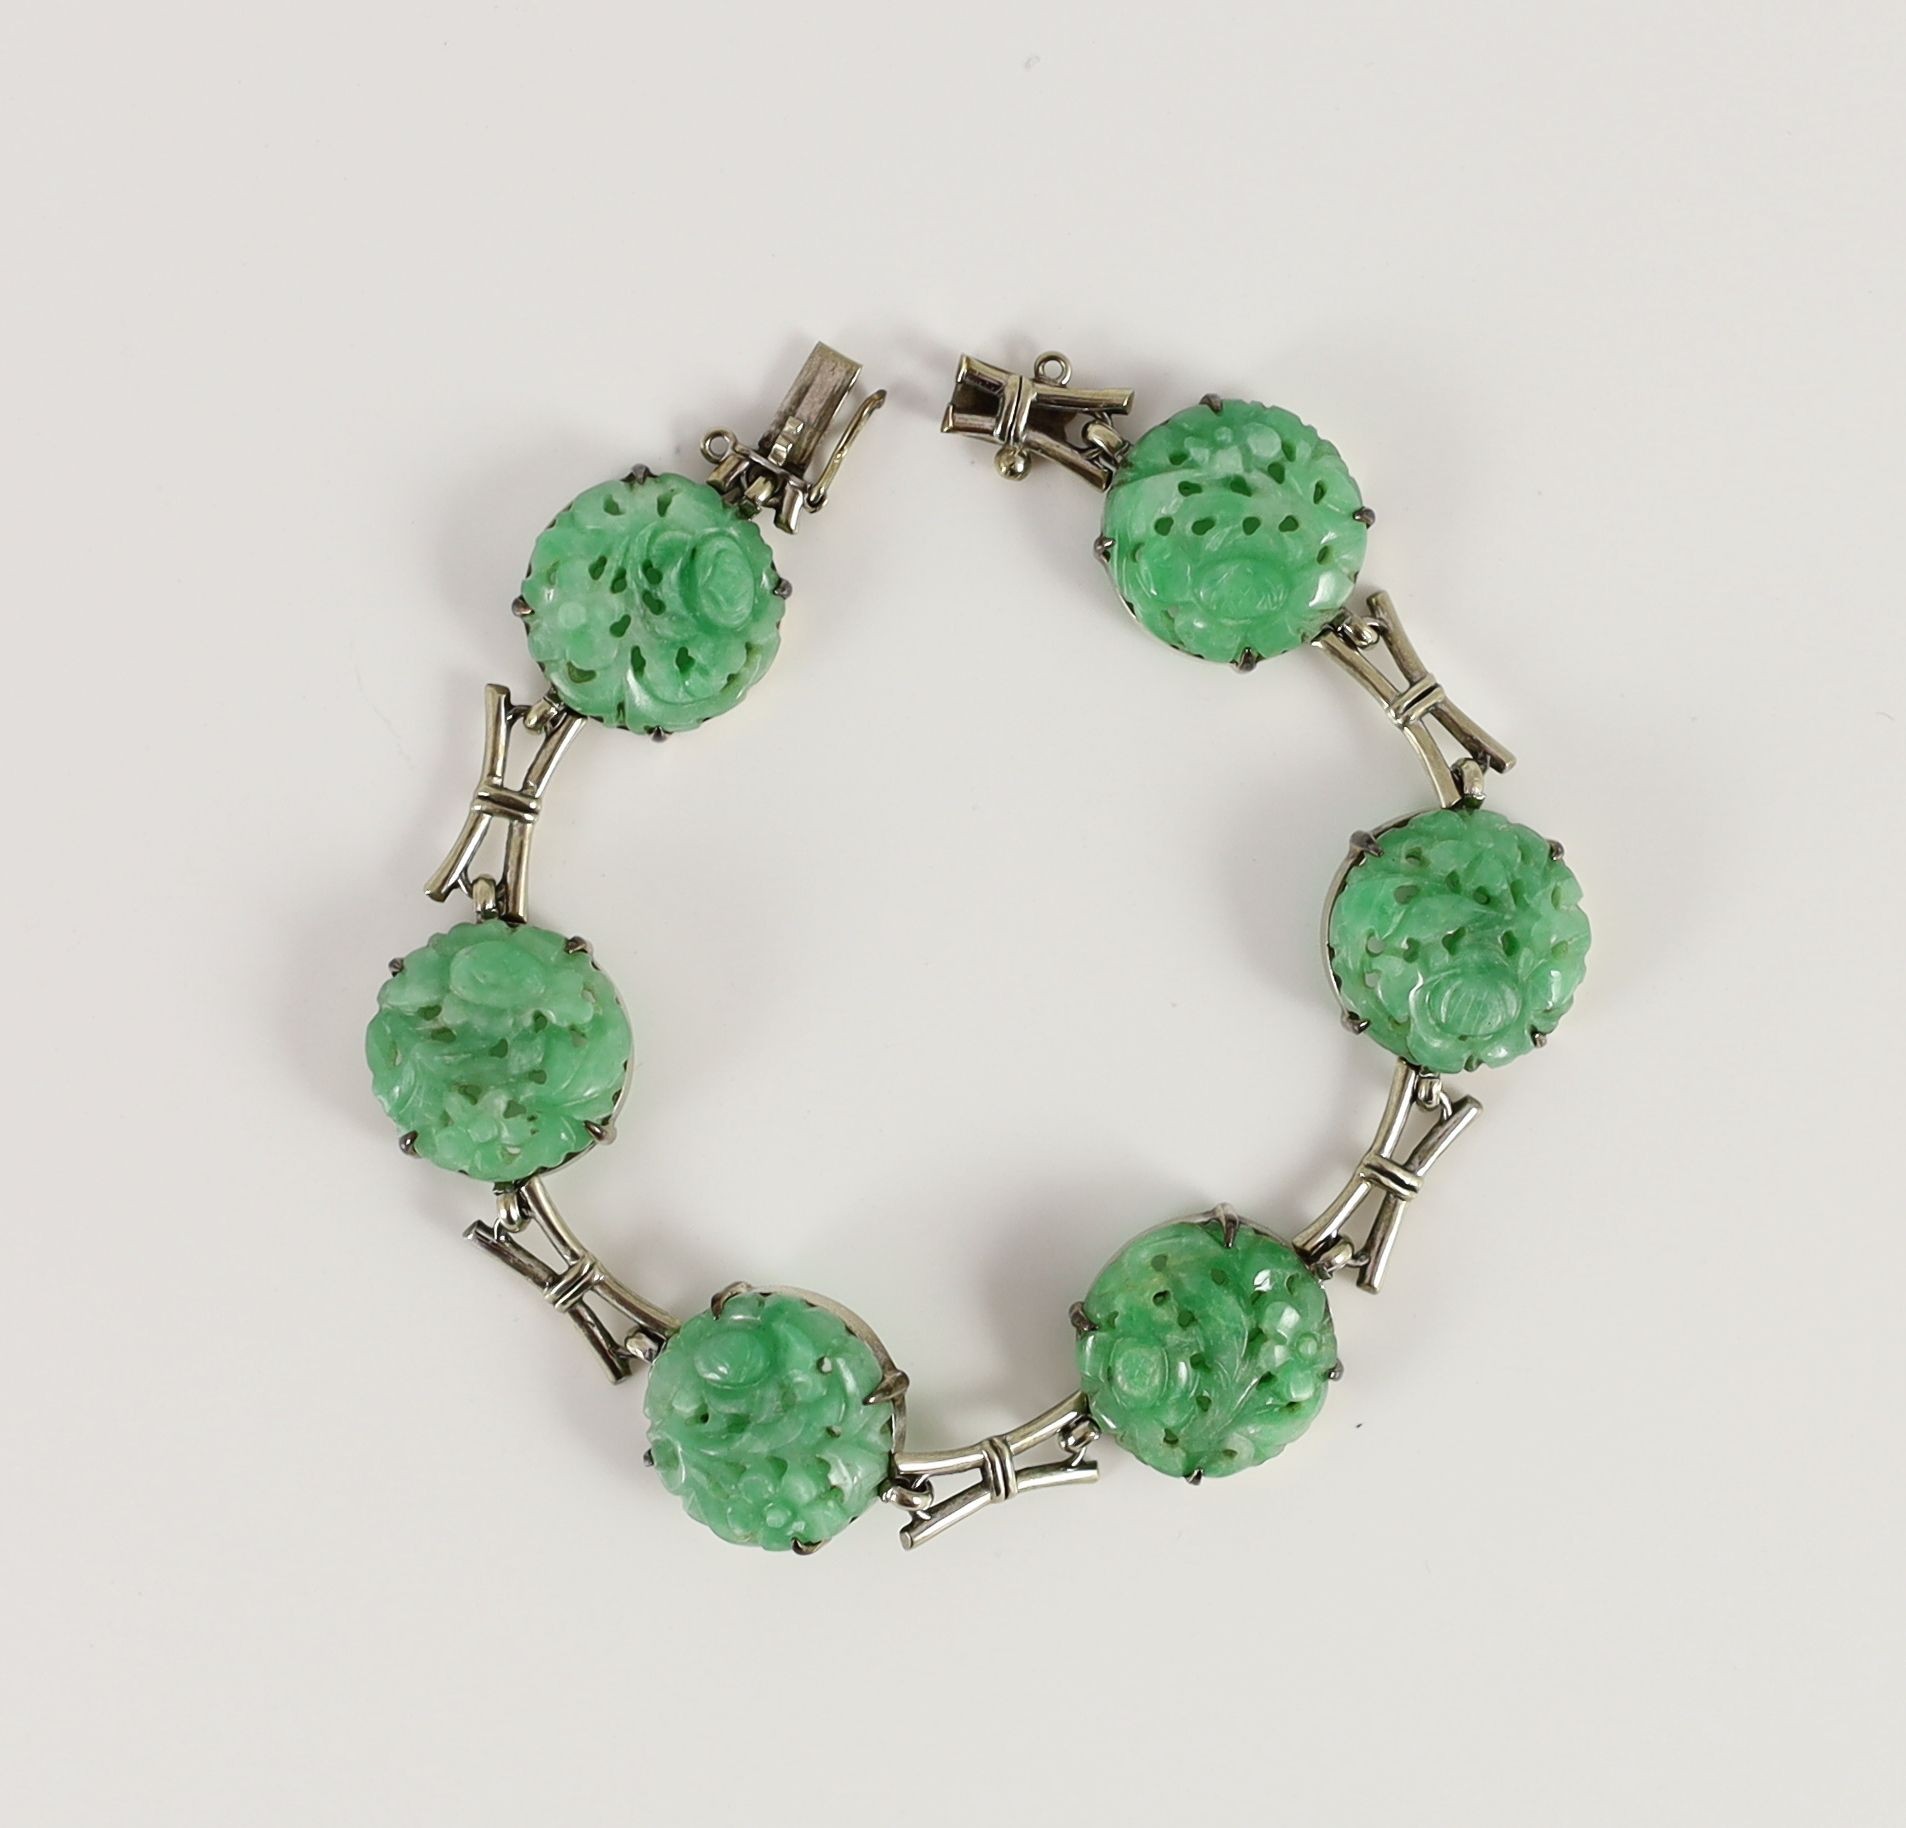 A mid 20th century 9ct white gold and jadeite set bracelet, in original Liberty & Co. fitted box